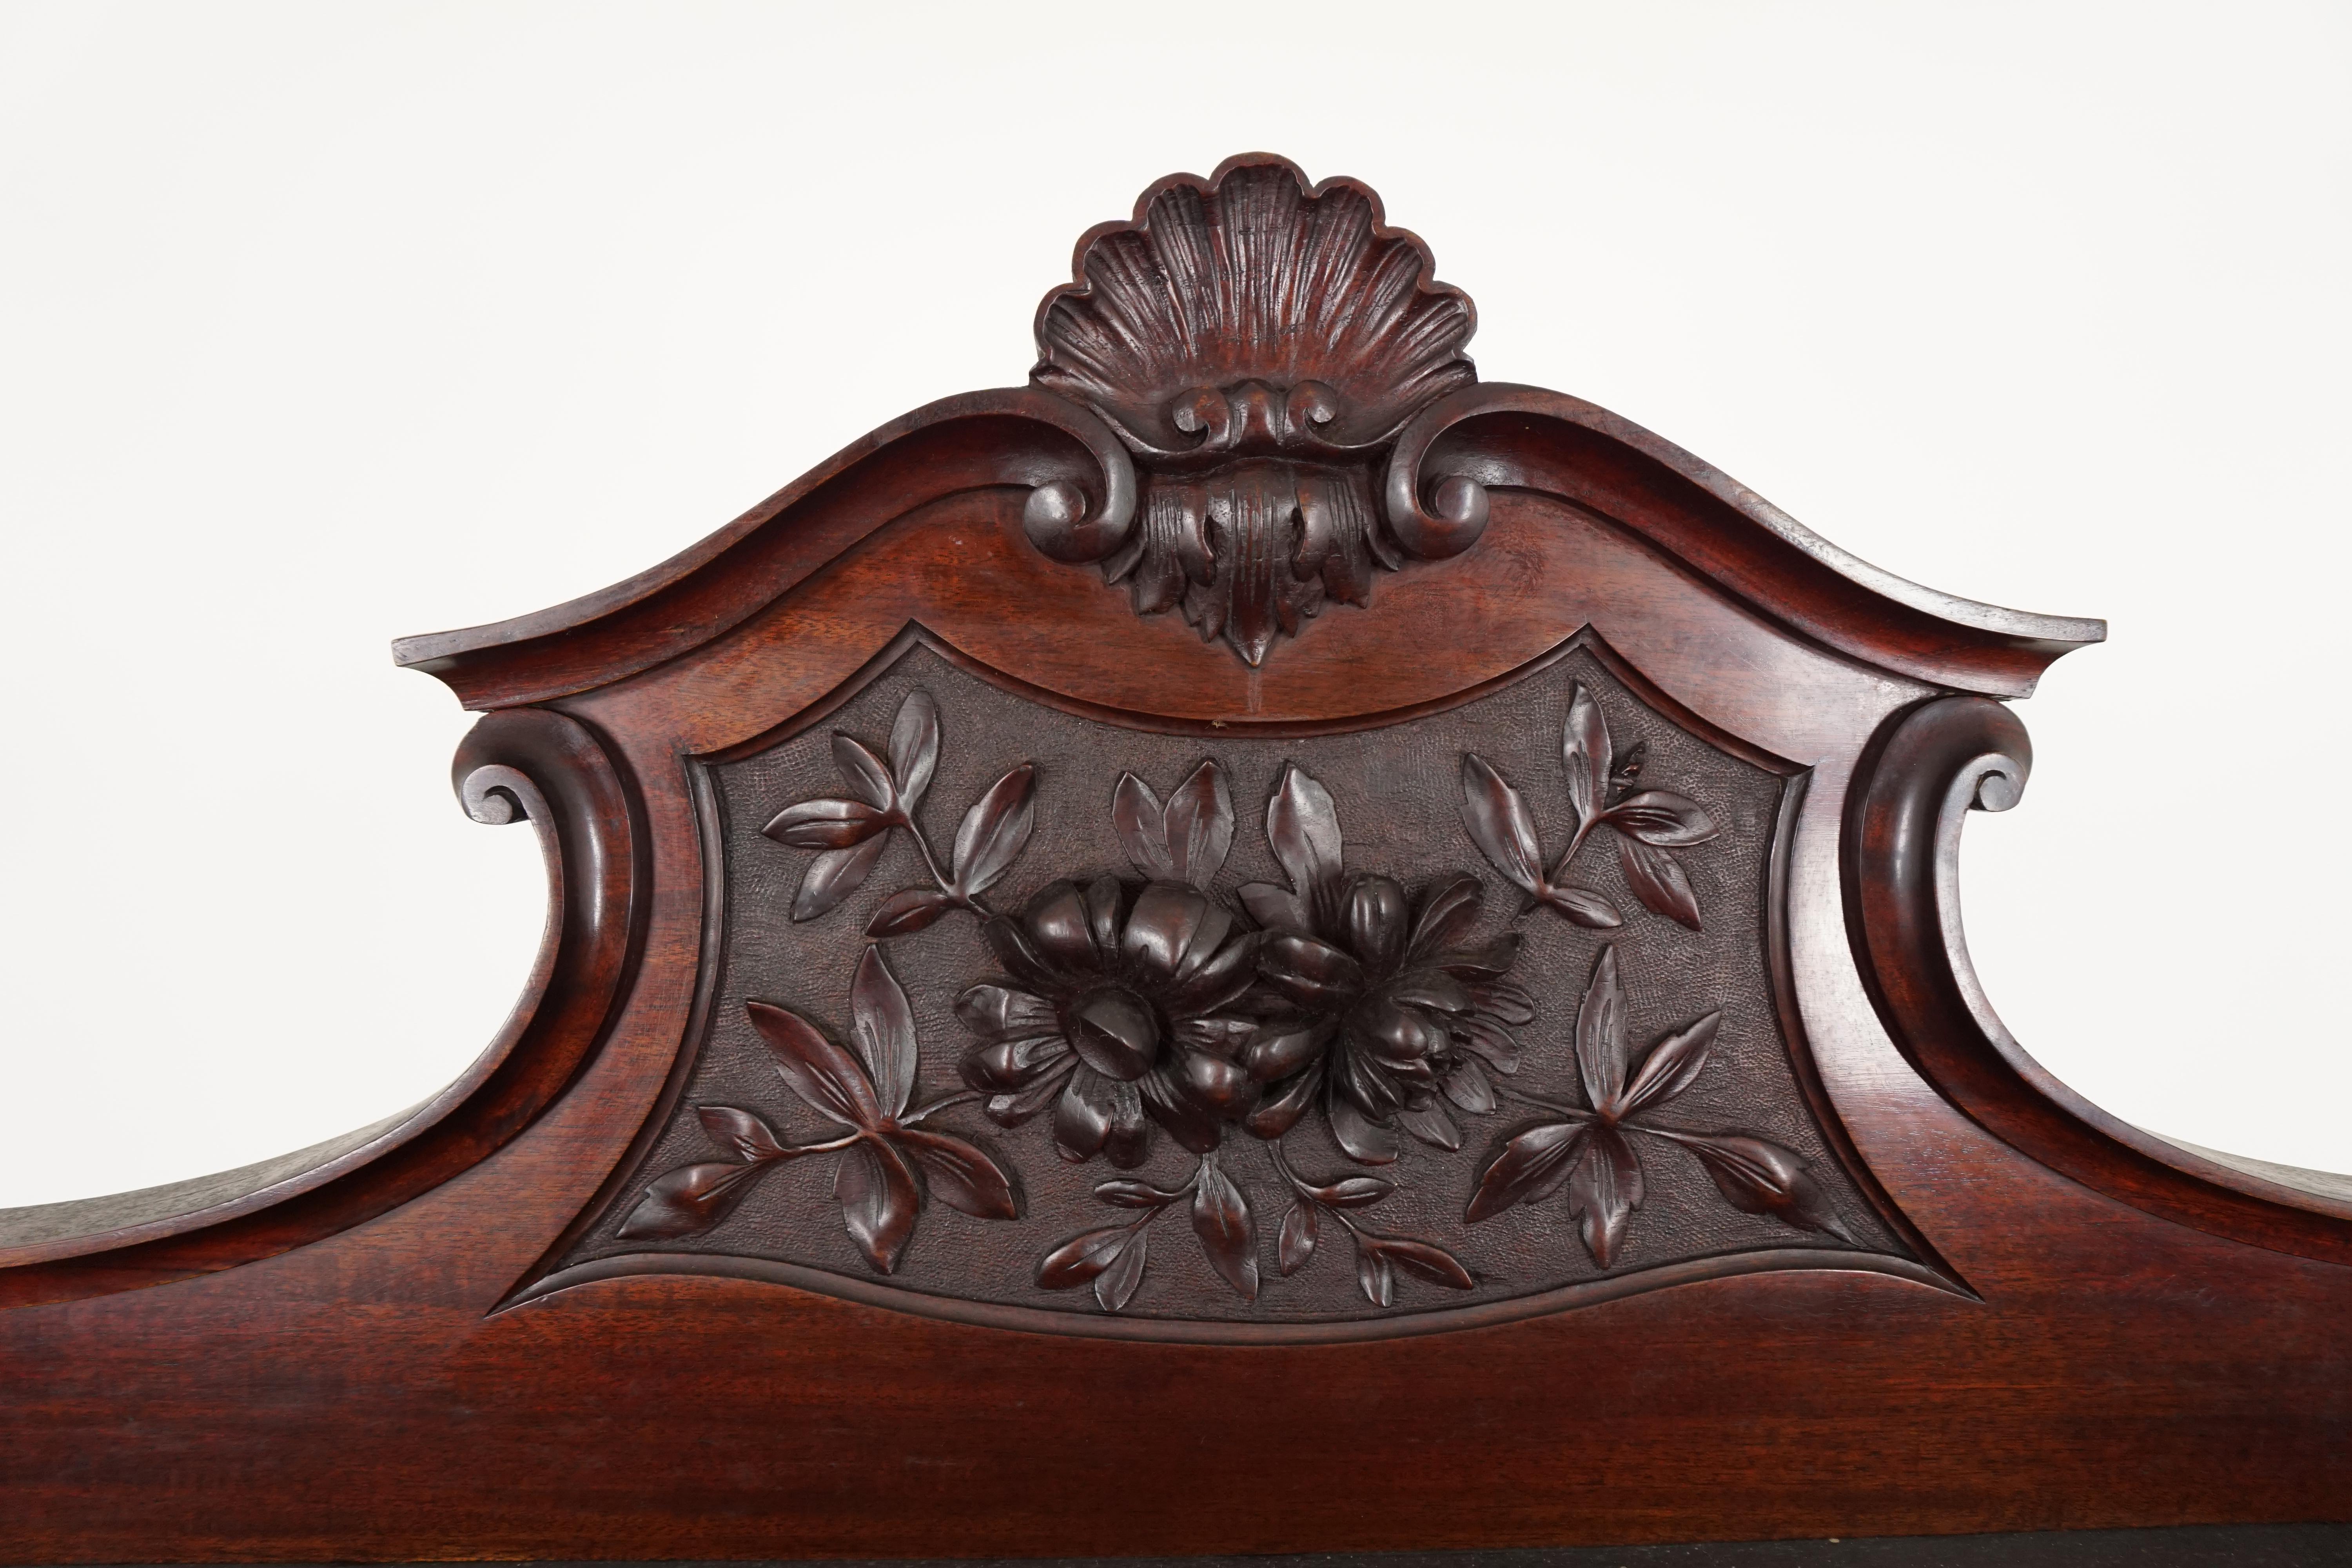 Hand-Crafted Antique Walnut Cabinet, Victorian Carved Parlor Cabinet, England 1880, B1864